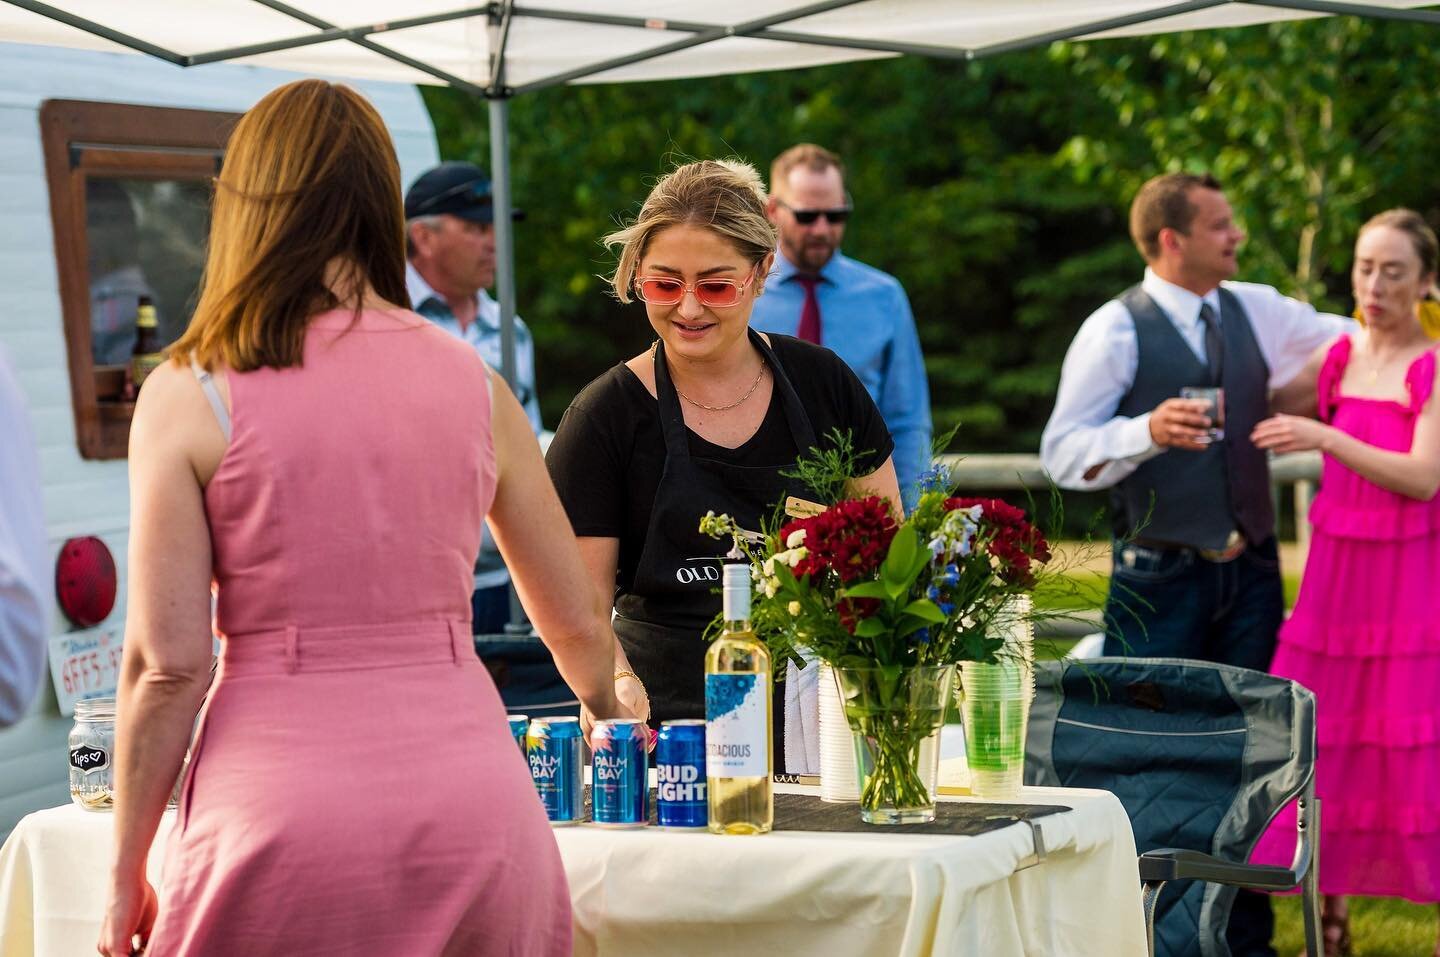 Aside from the mobile bar, we also have a wine, beer, and canned cocktail table alongside the trailer. @vizzyhardseltzerca were definitely a fan favourite this summer ☀️
Book your 2023 event with us 
https://www.theoldfashionedmobilebar.ca
Photo: @am